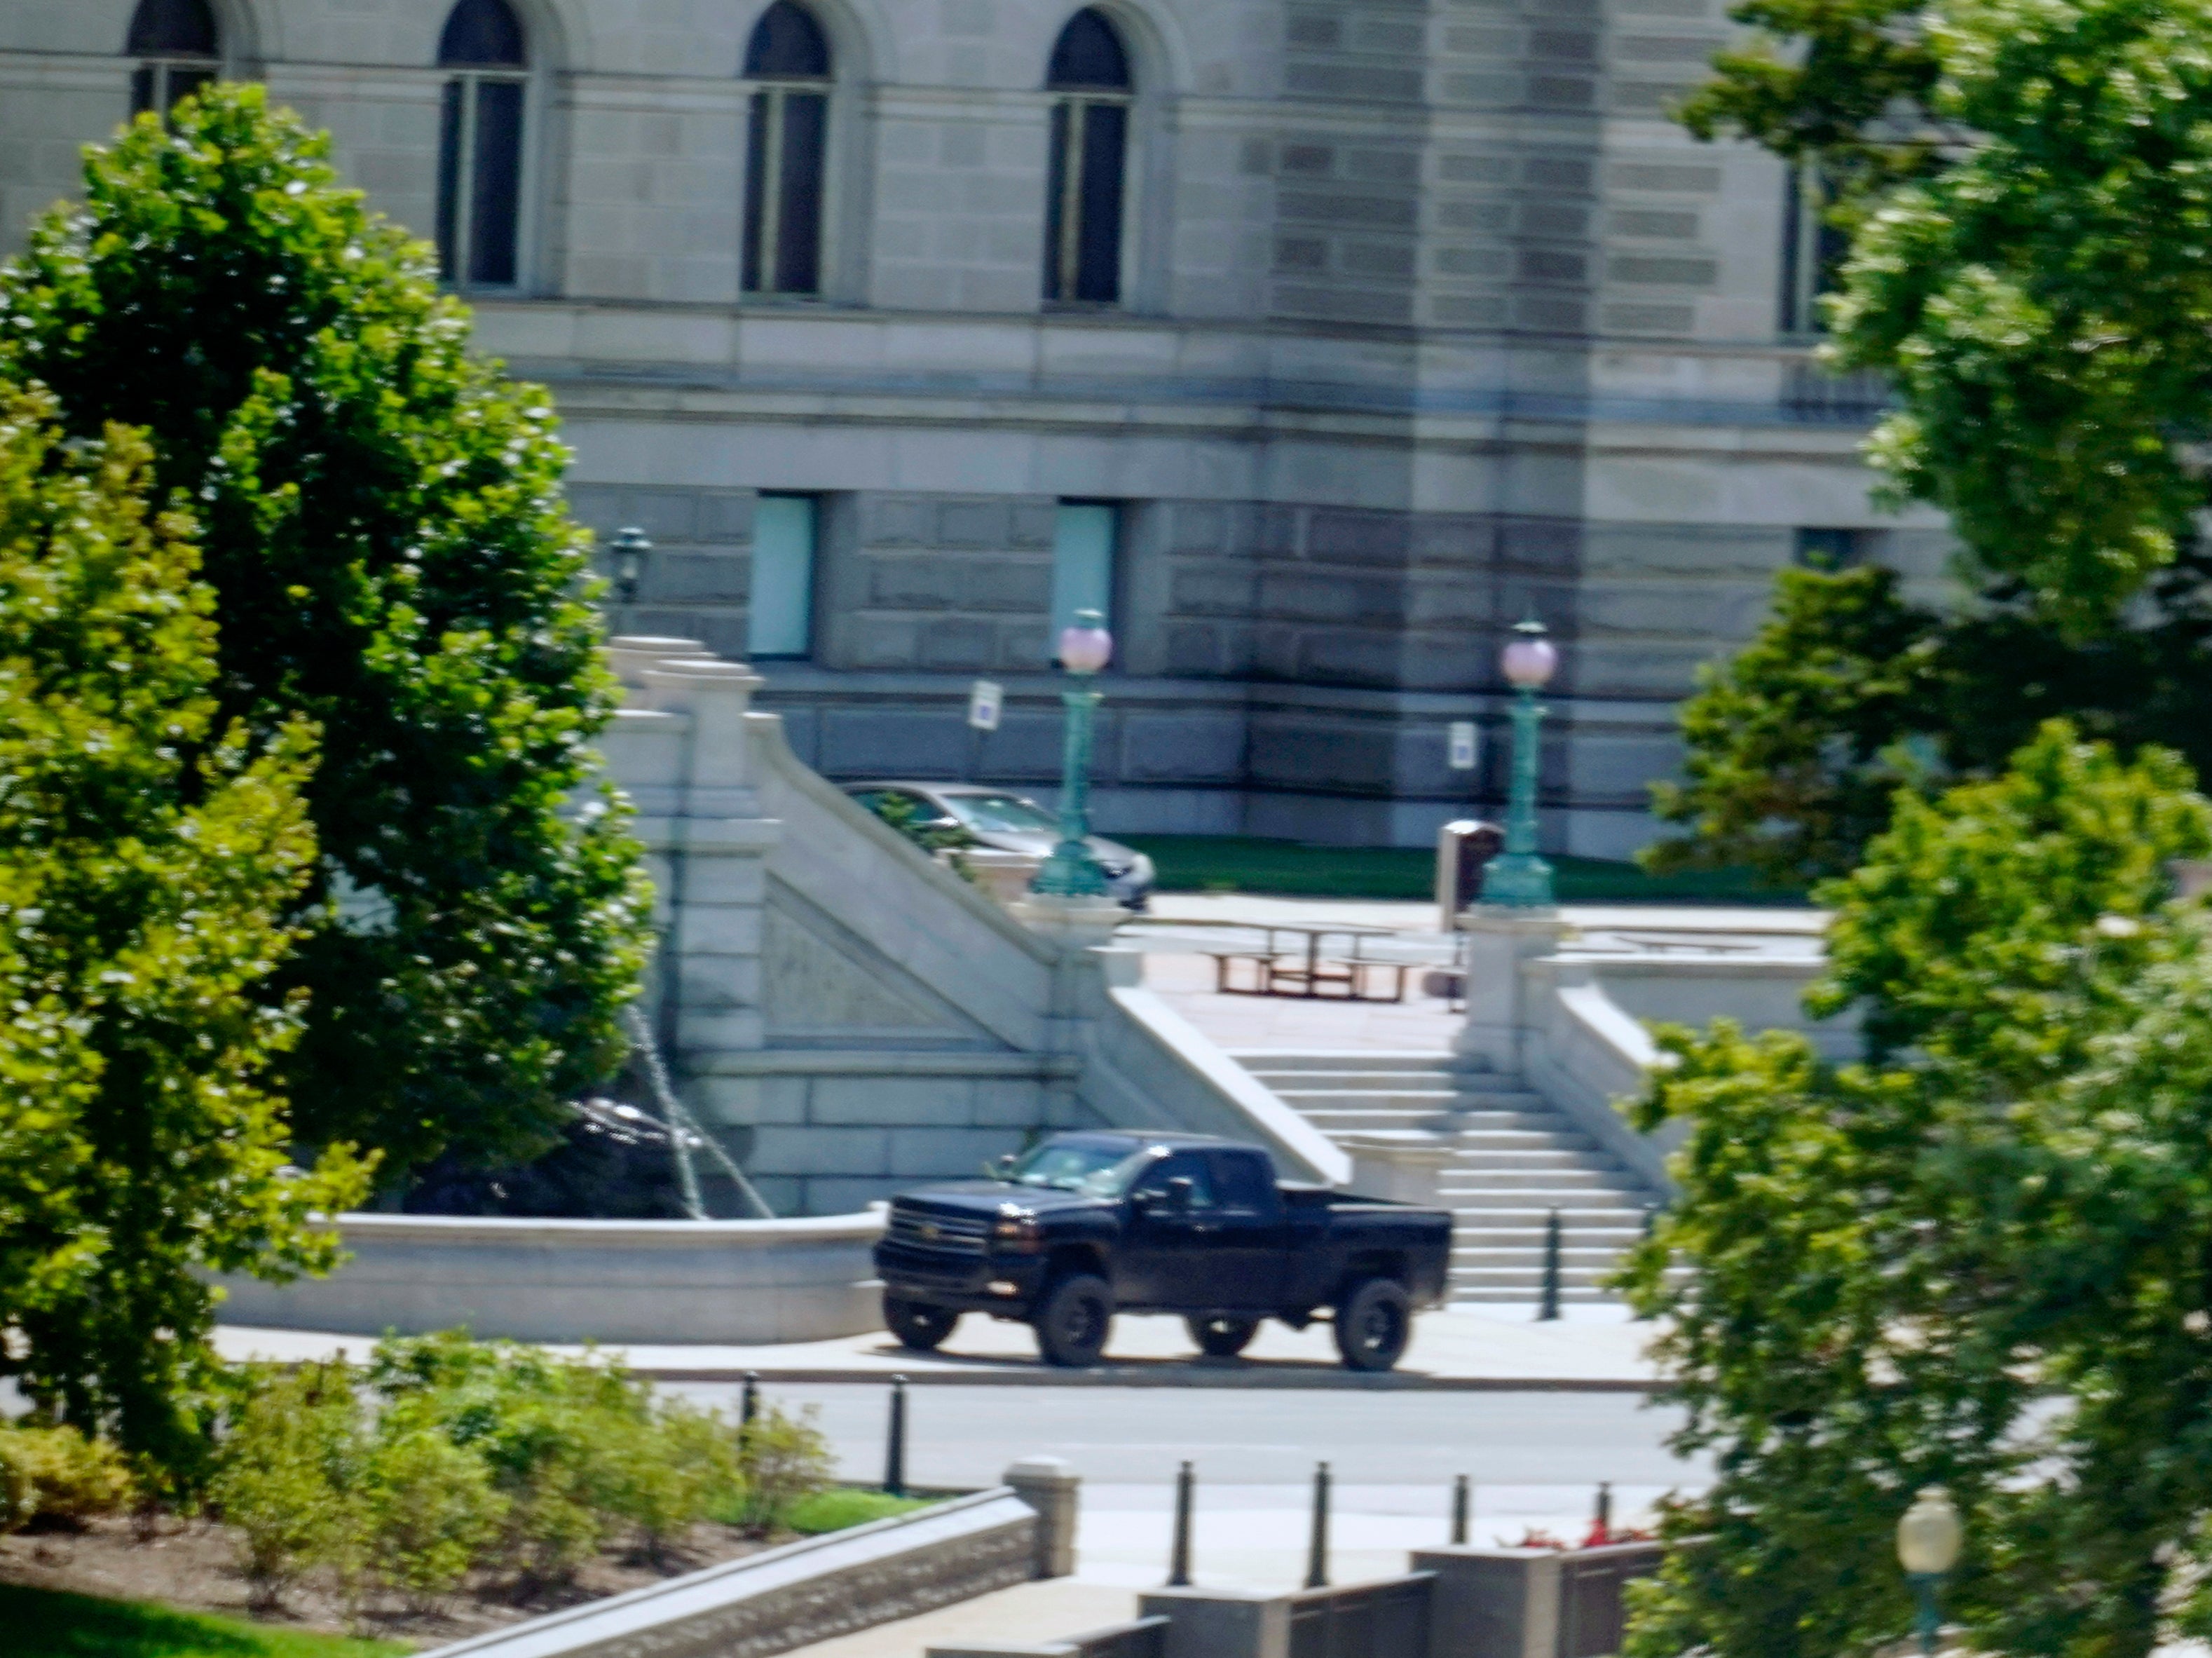 A pickup truck is parked on the sidewalk in front of the Library of Congress' Thomas Jefferson Building, as seen from a window of the U.S. Capitol, Thursday, Aug. 19, 2021, in Washington.